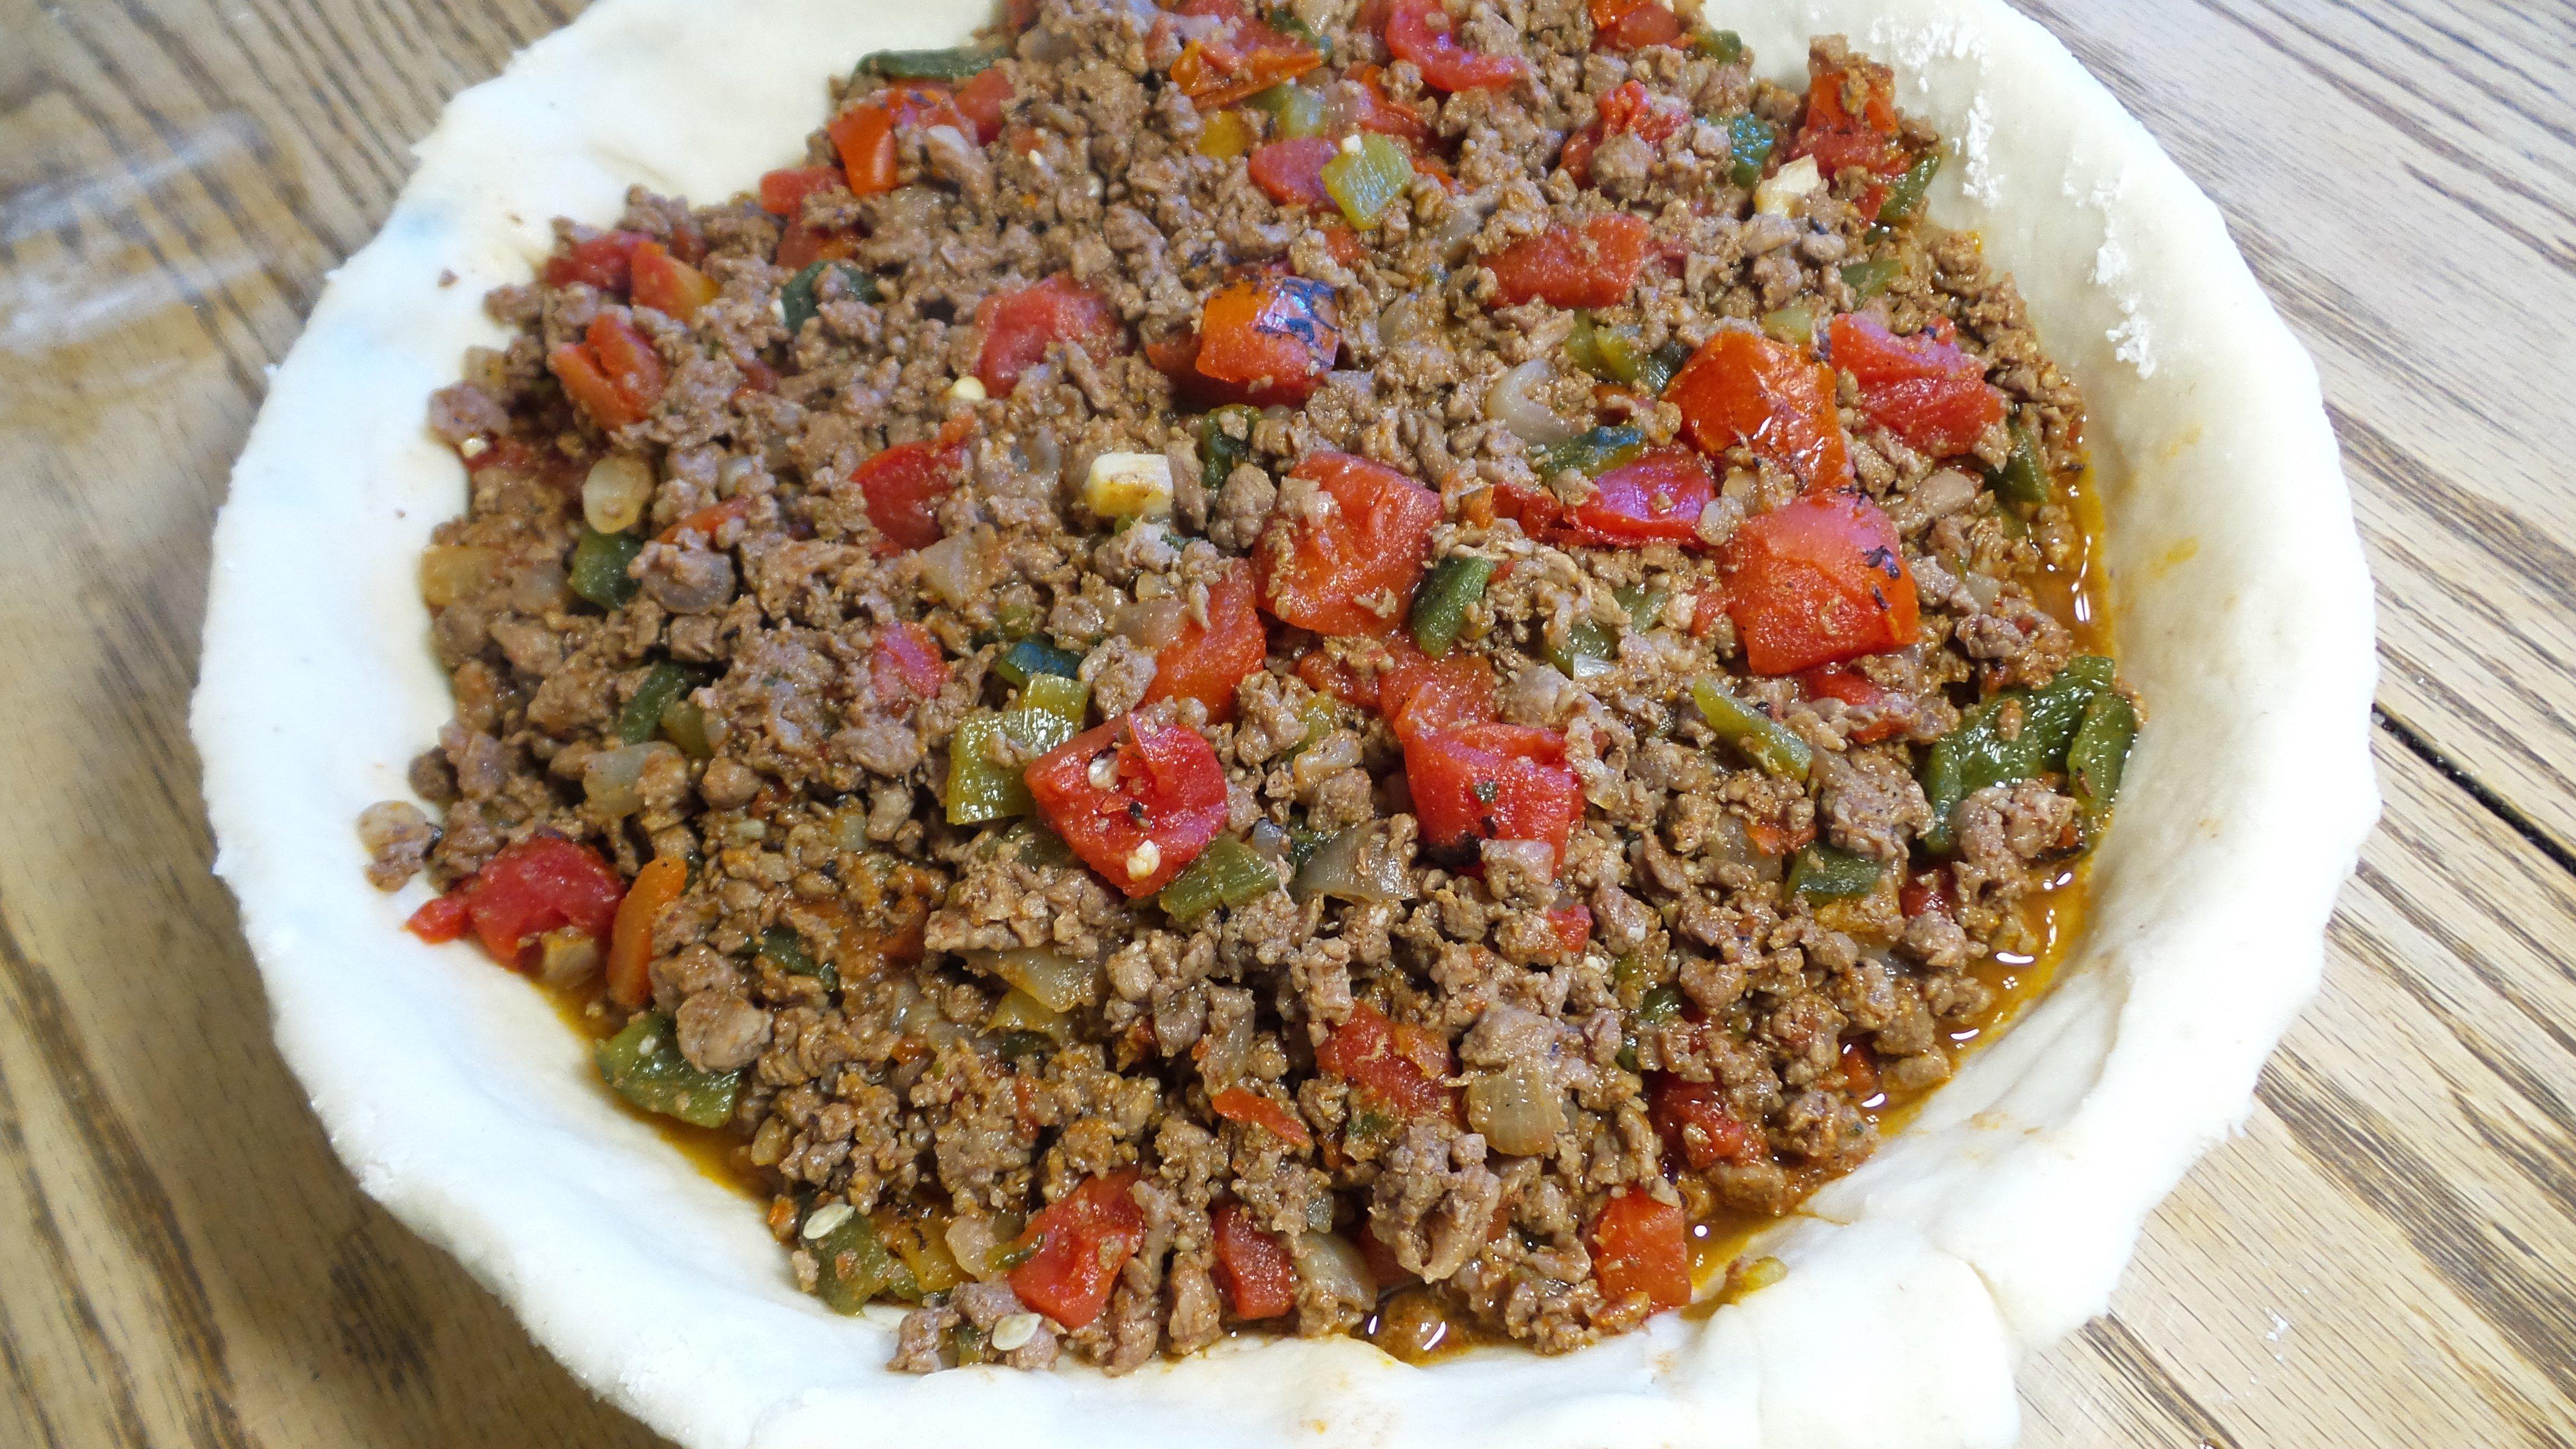 Fill the pie crust three quarters of the way full with the meat mixture.